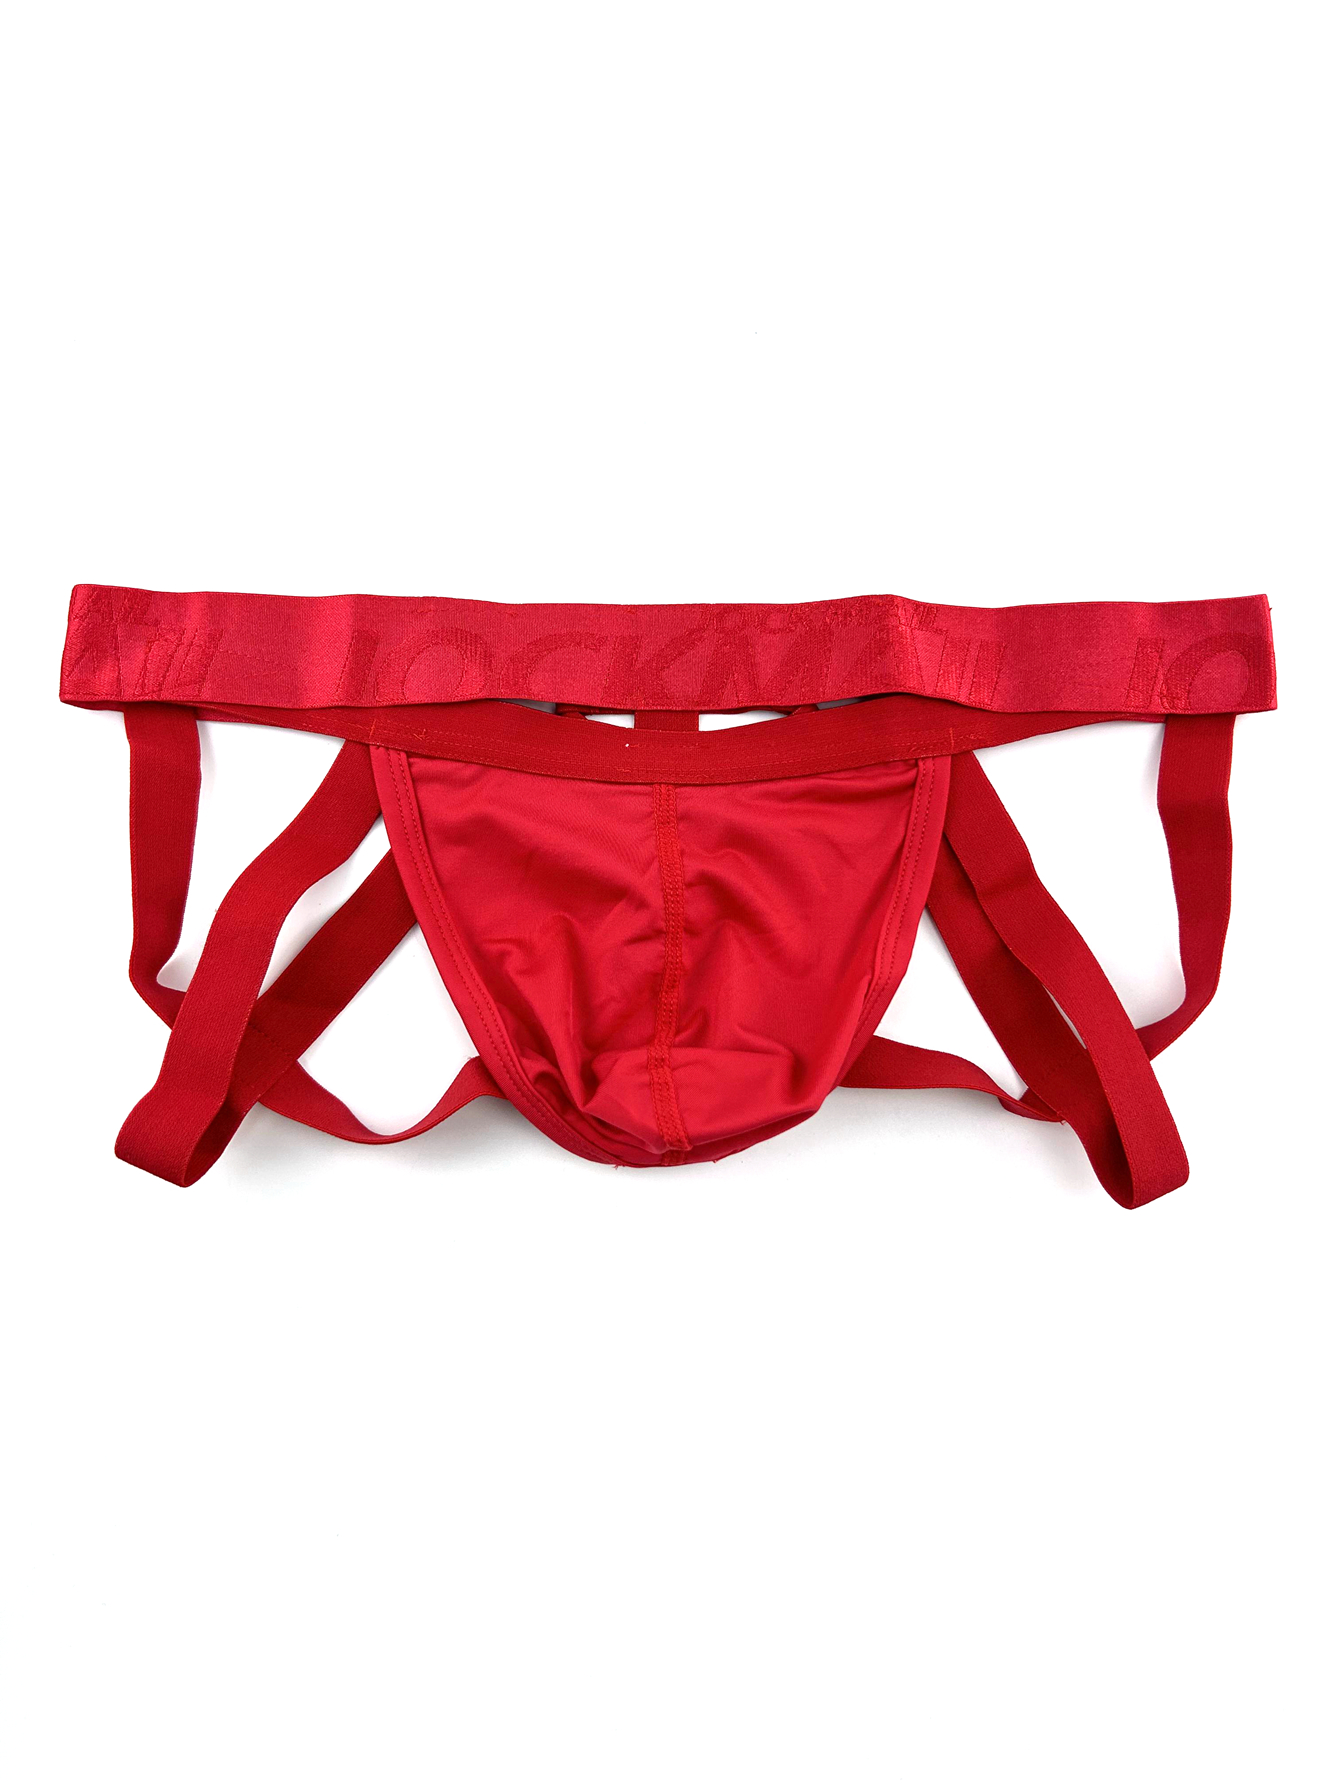 Men's G-String Thongs, Bikini Low Rise Brief Underwear for Men Athletic  Supporters